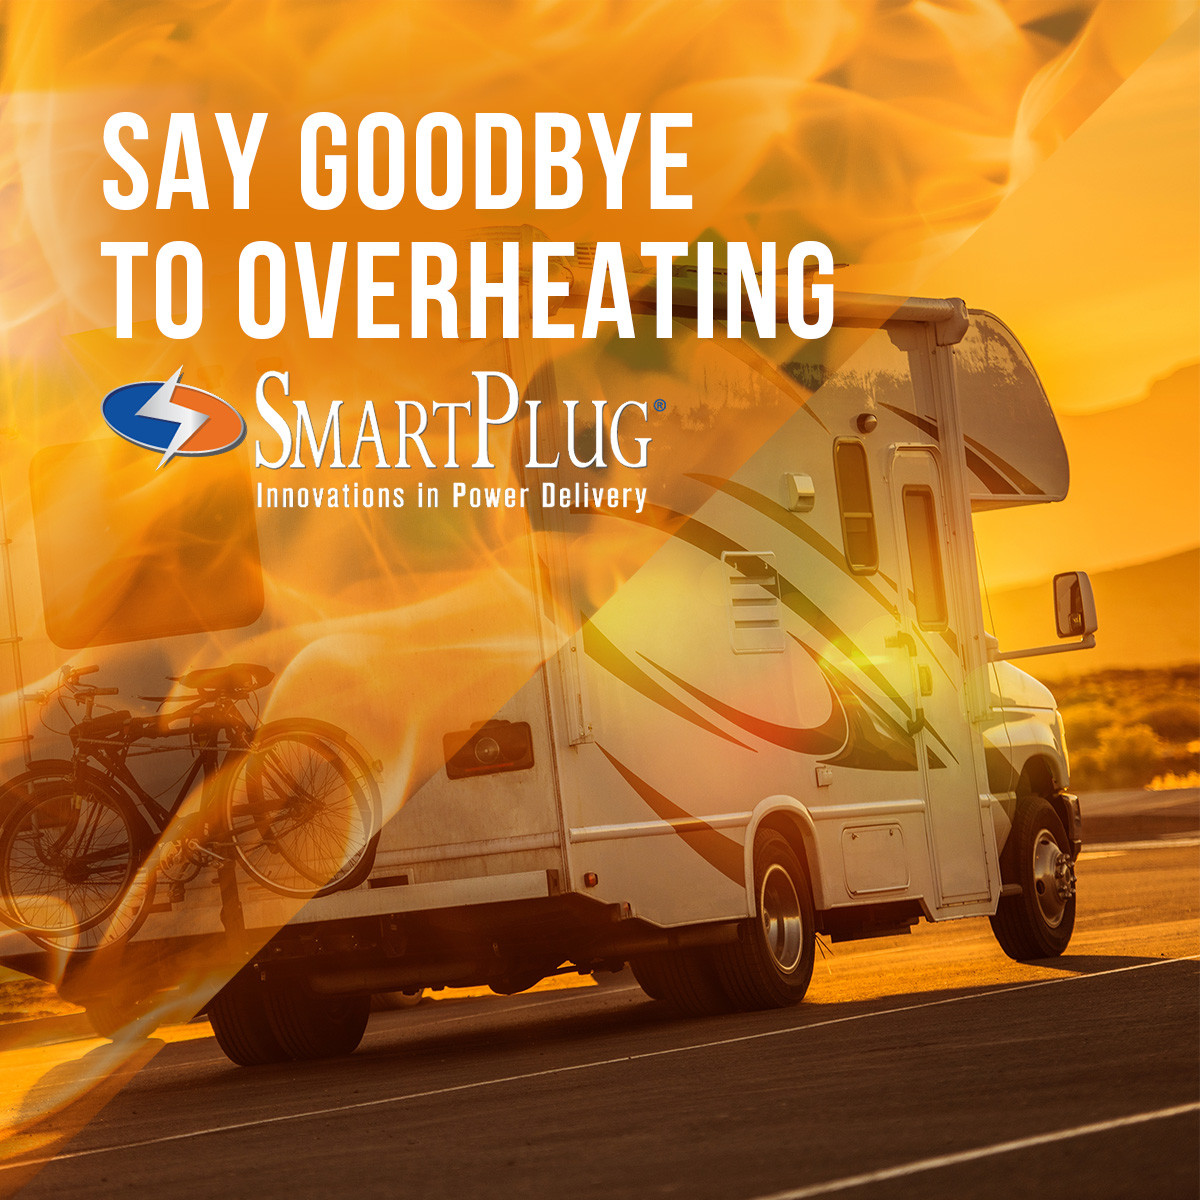 👋Say goodbye to overheating, melted plugs, and RV cord damage with SmartPlug's revolutionary design! There's no better way to power your RV, so trust us on your every journey. 

smartplug.com | 206-285-2990

#SmartPlug #RVSafety #RVAccessories #ShorePowerSystem